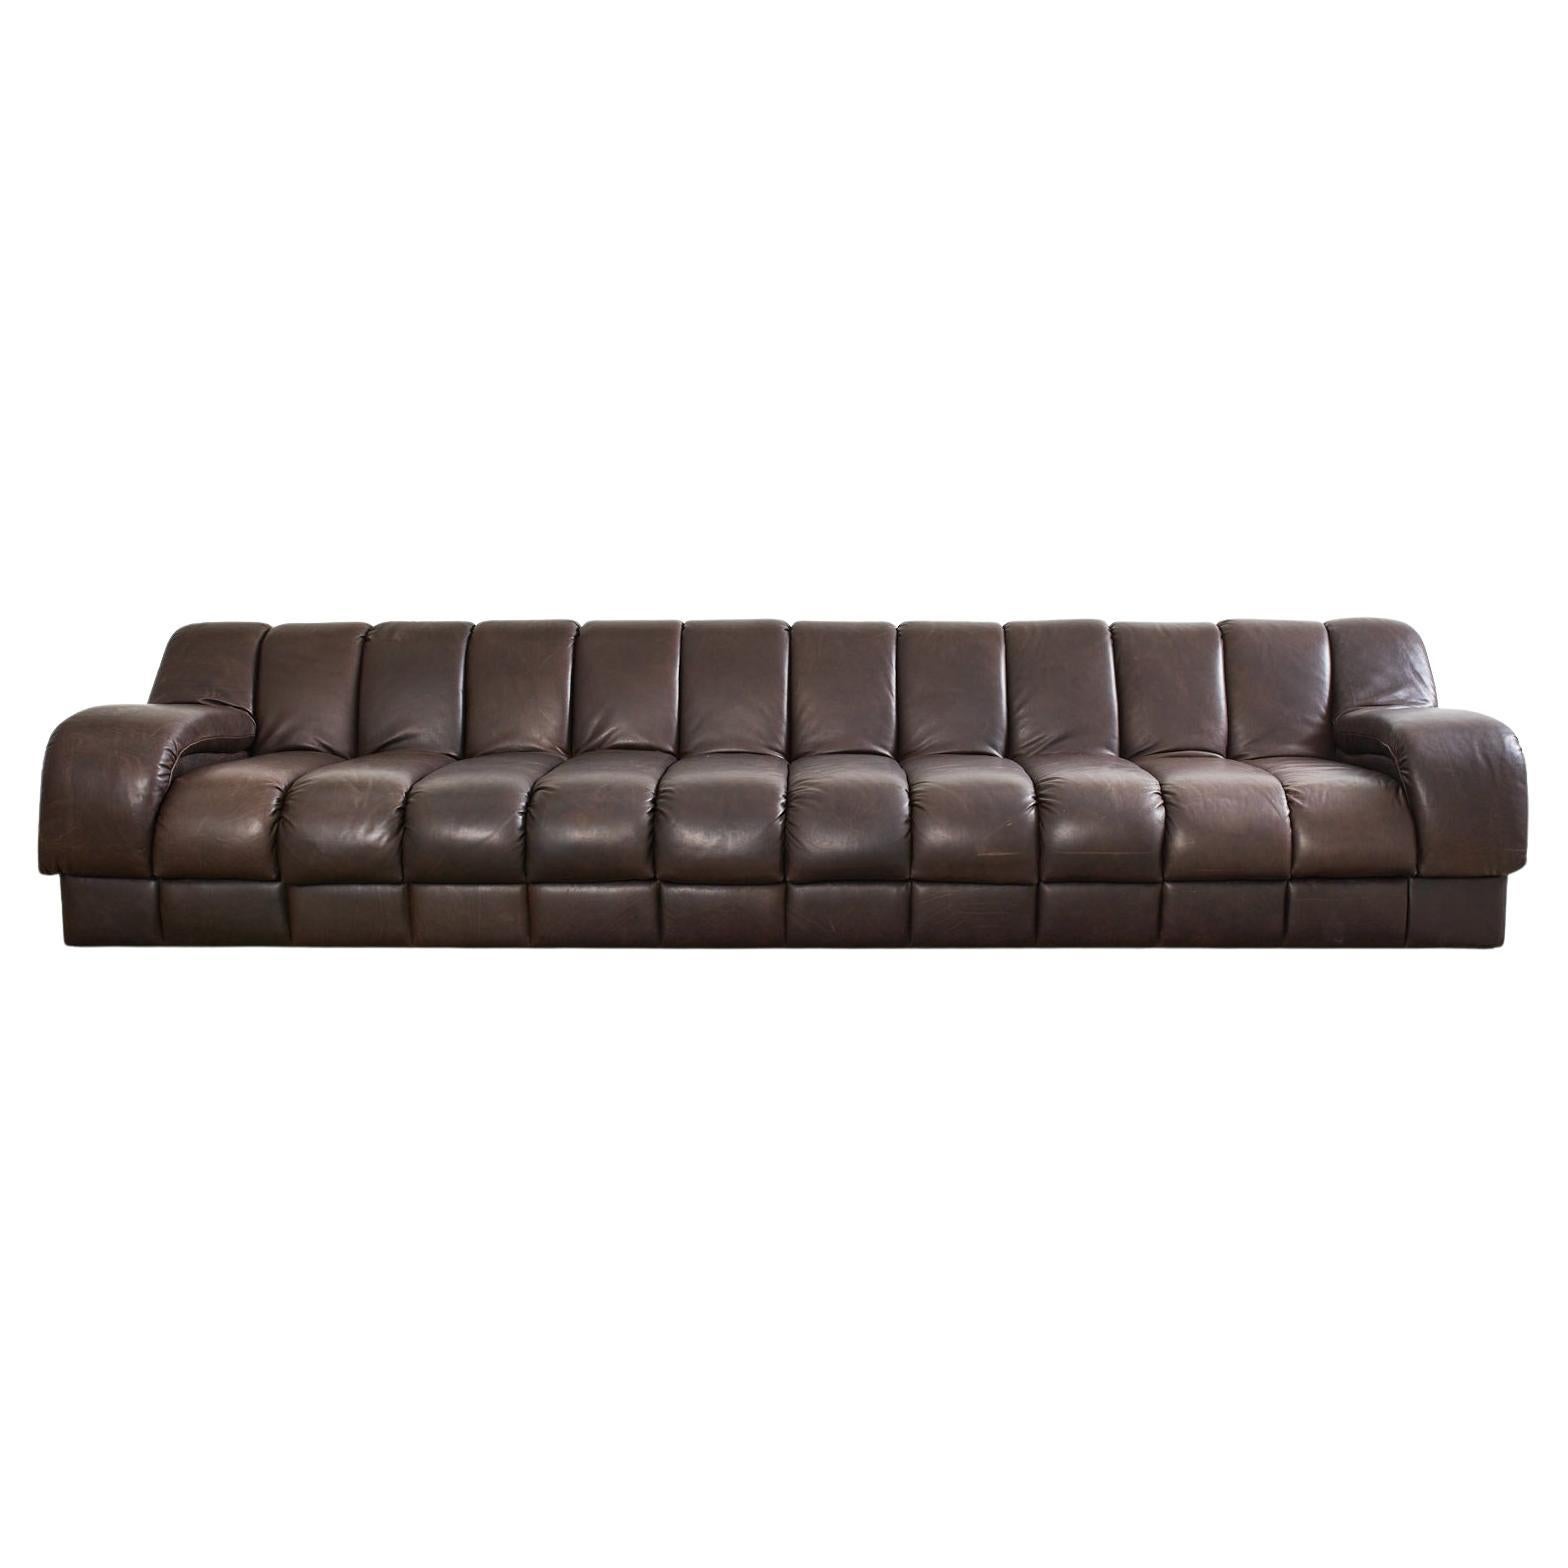 Monumental Steve Chase Monterey Style Channeled Leather Sofa